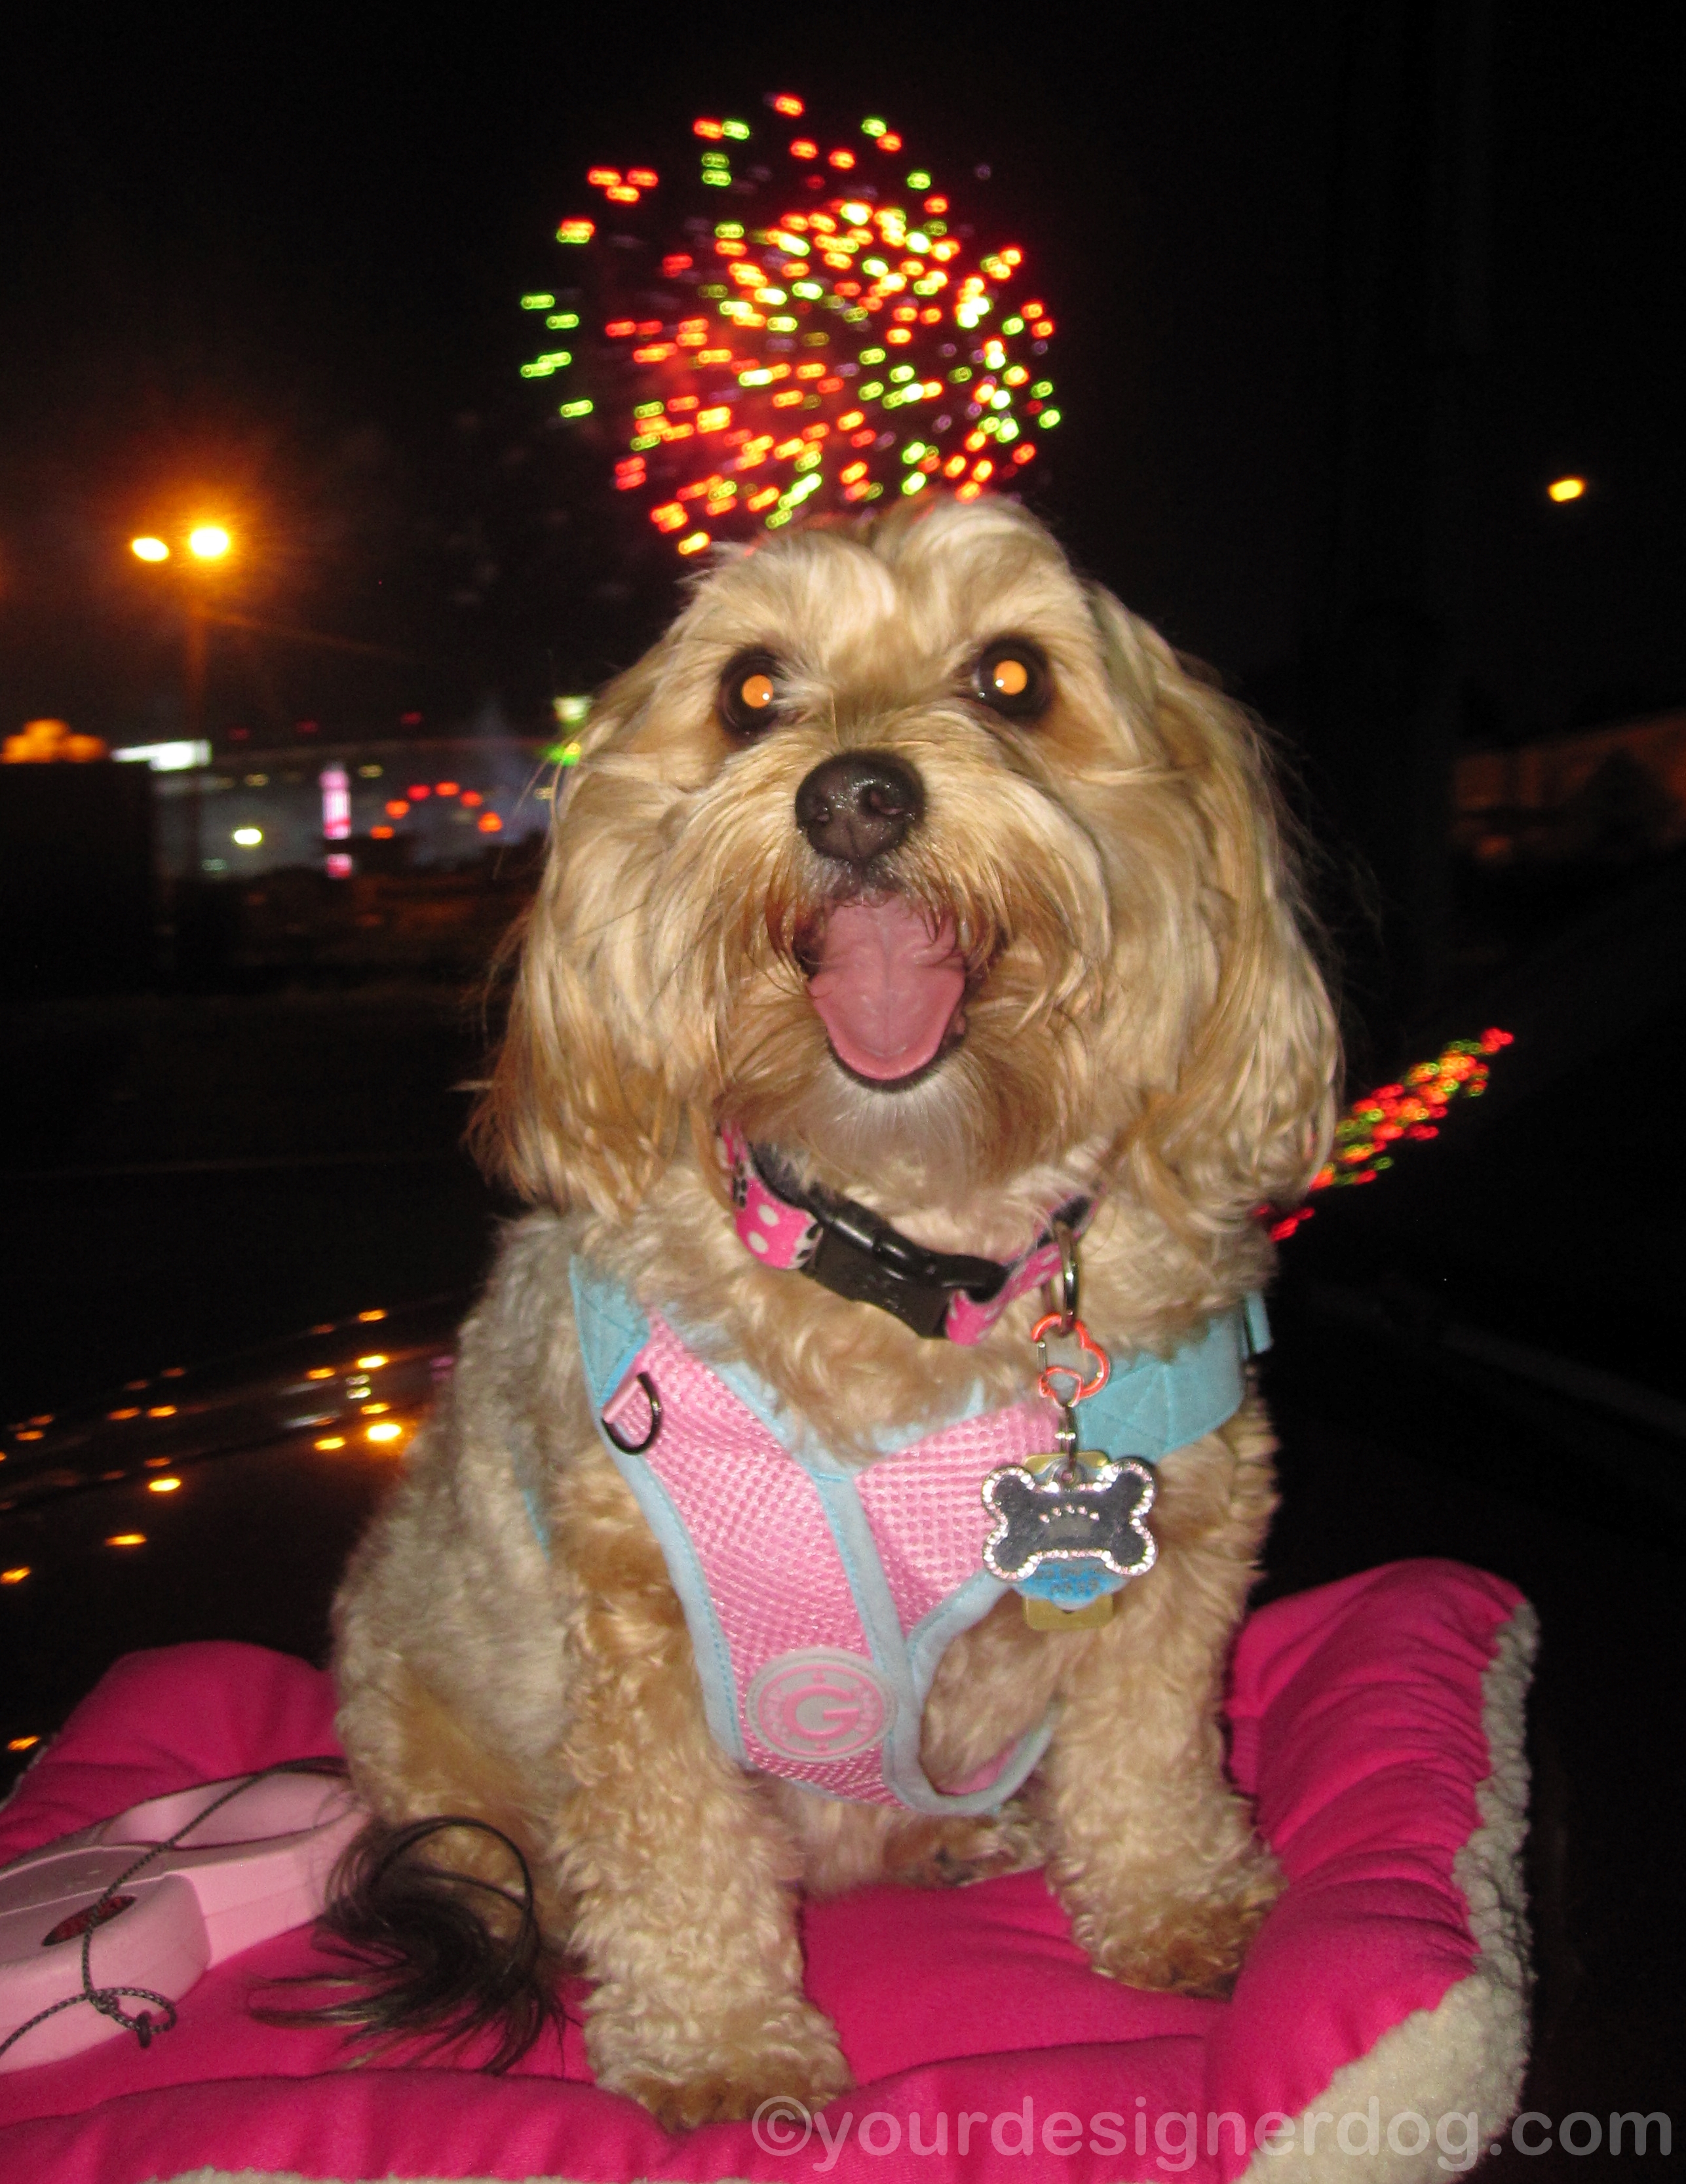 dogs, designer dogs, yorkipoo, yorkie poo, fireworks, tongue out, fourth of july